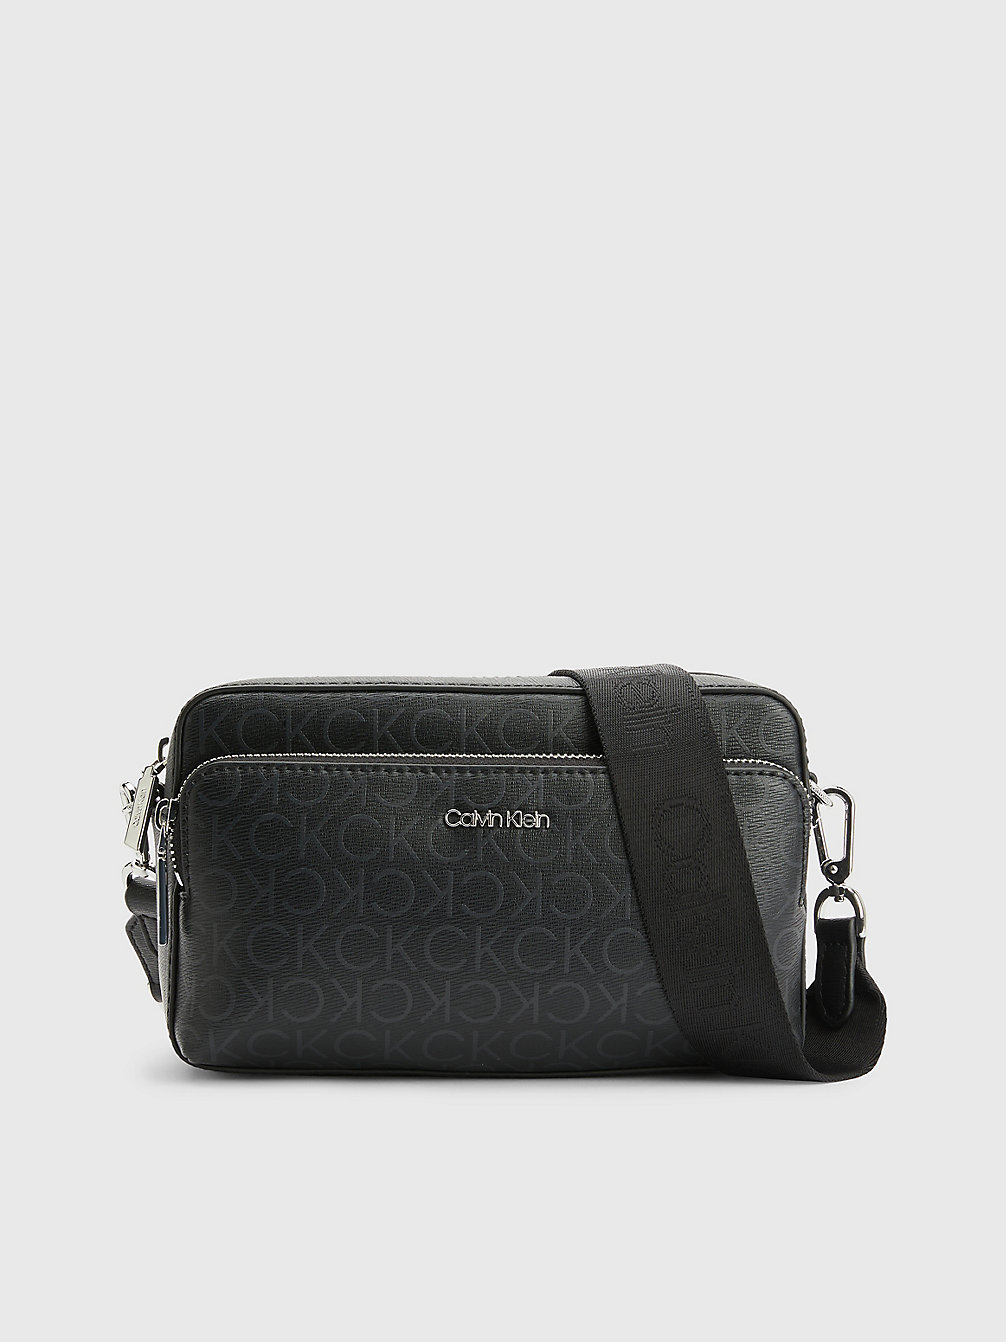 BLACK/MONO Large Recycled Crossbody Bag undefined women Calvin Klein